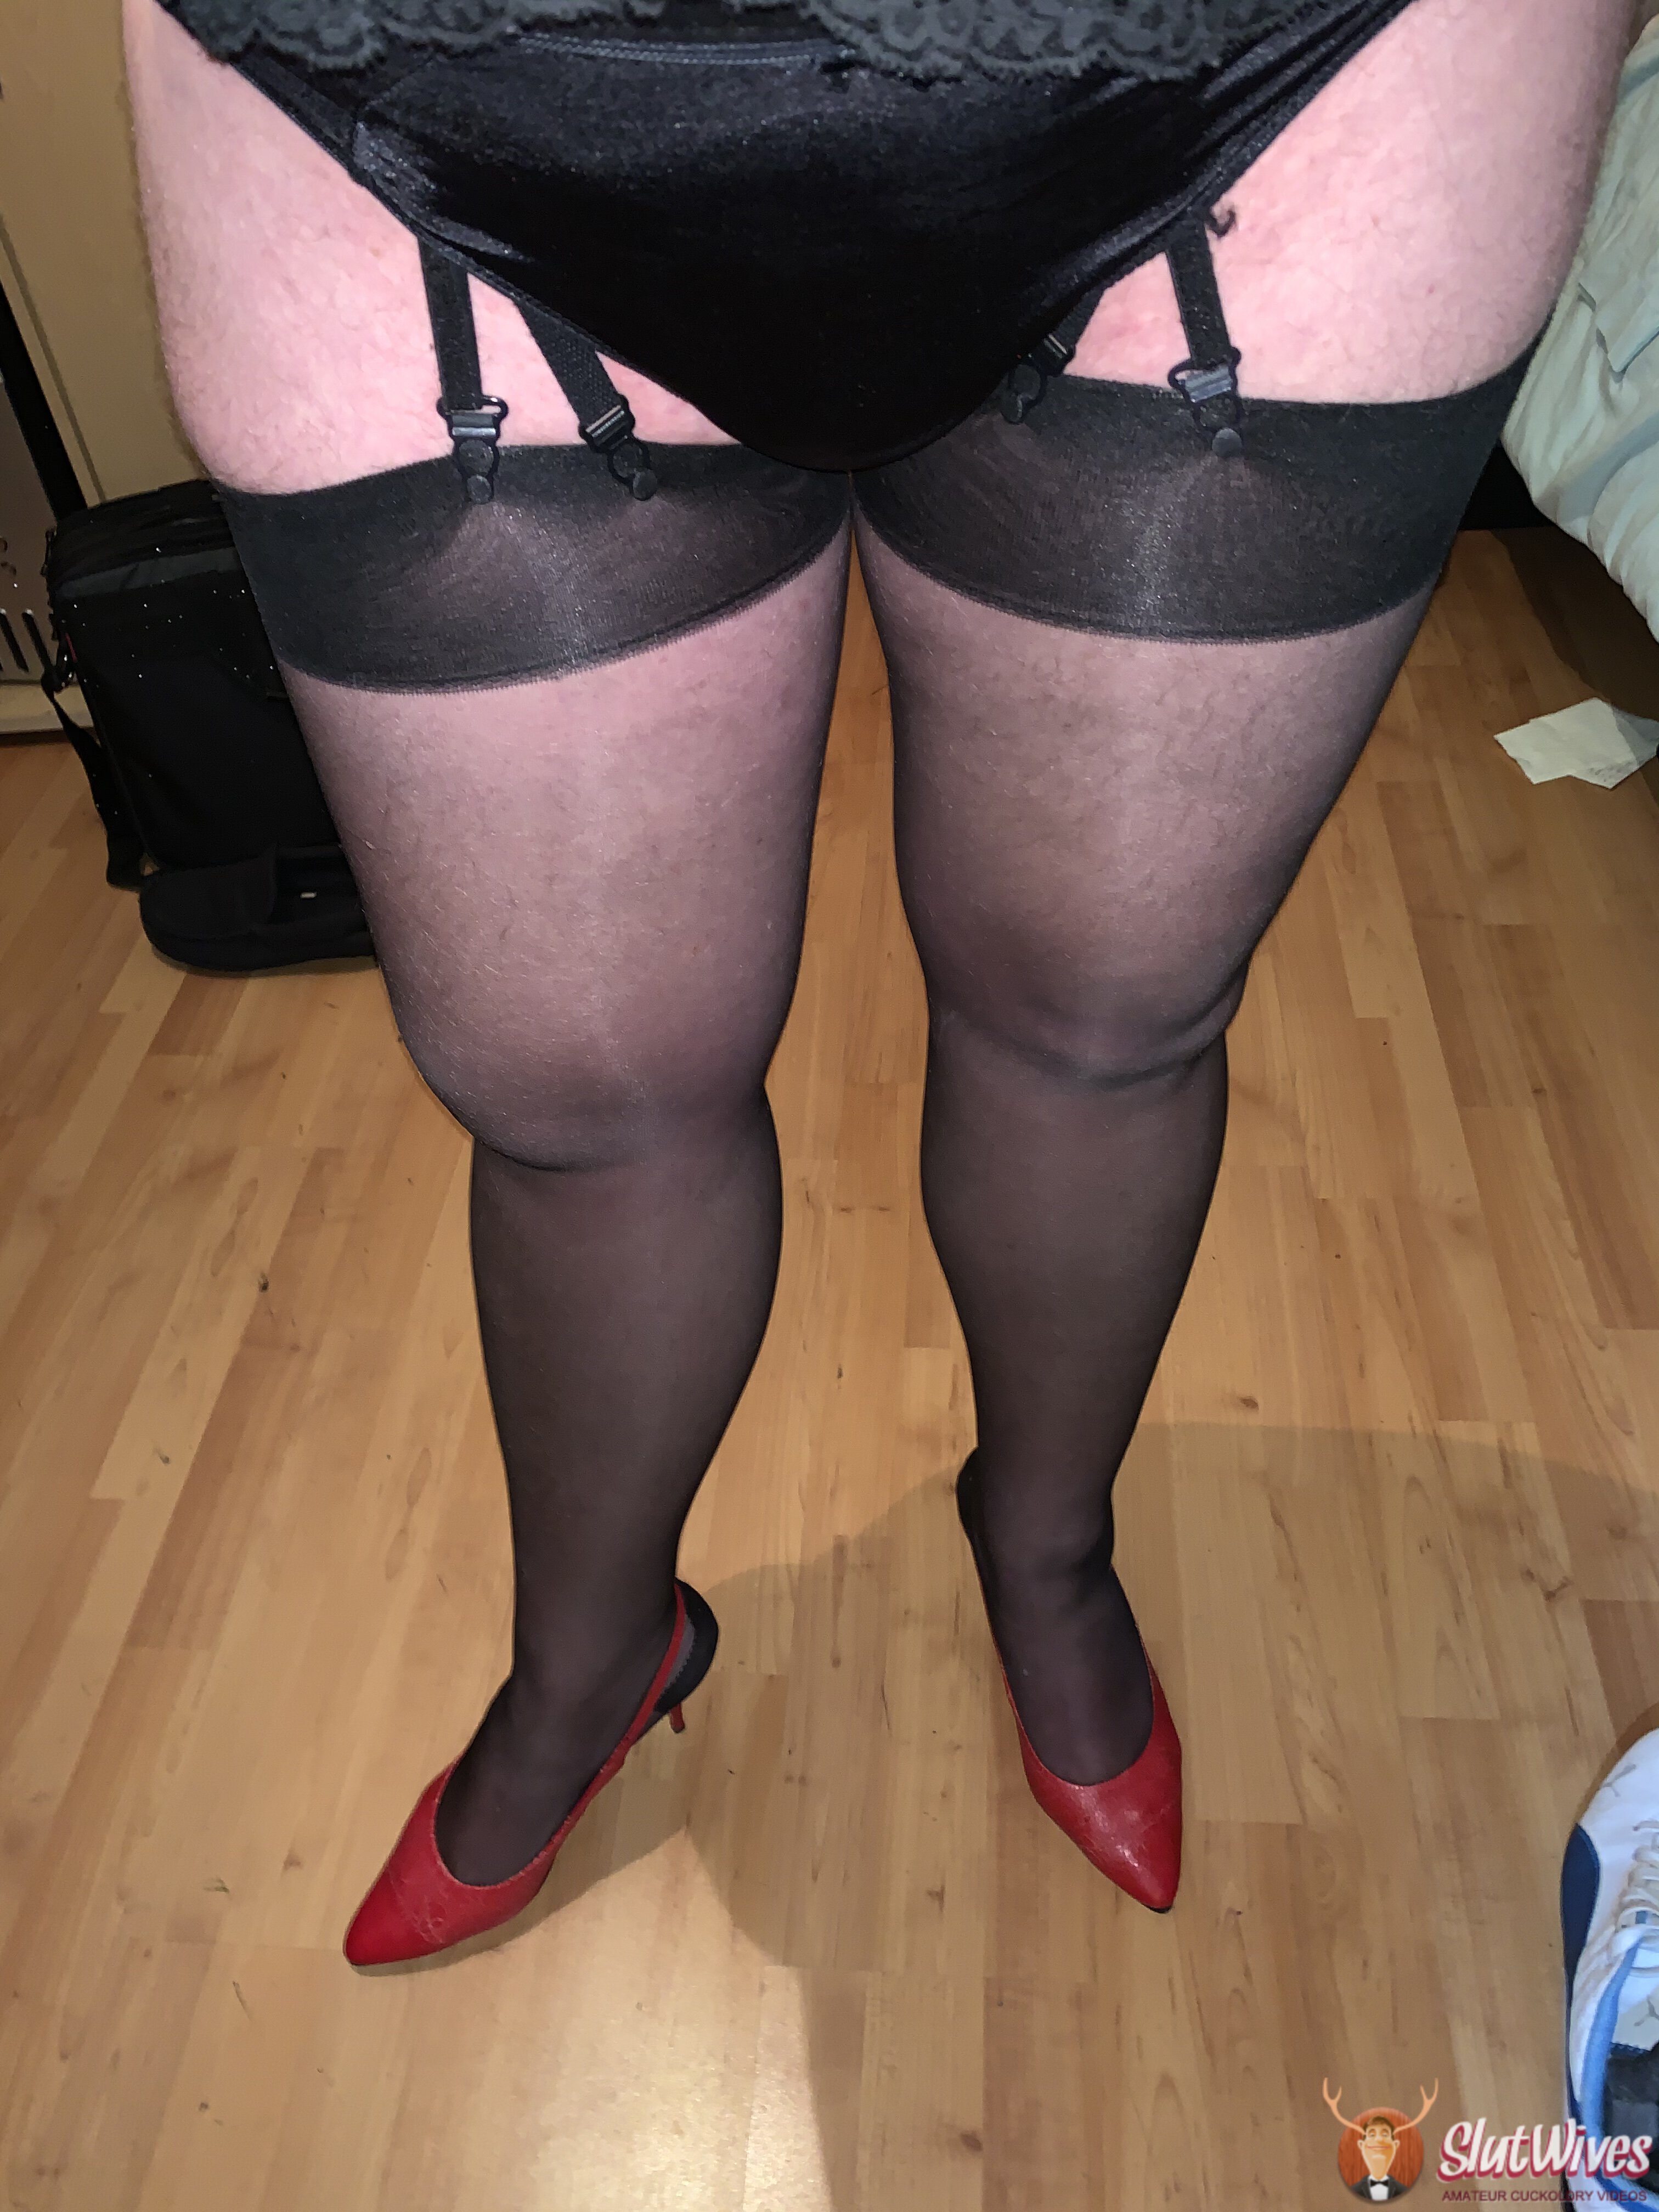 I know how the wife feels in stockings now